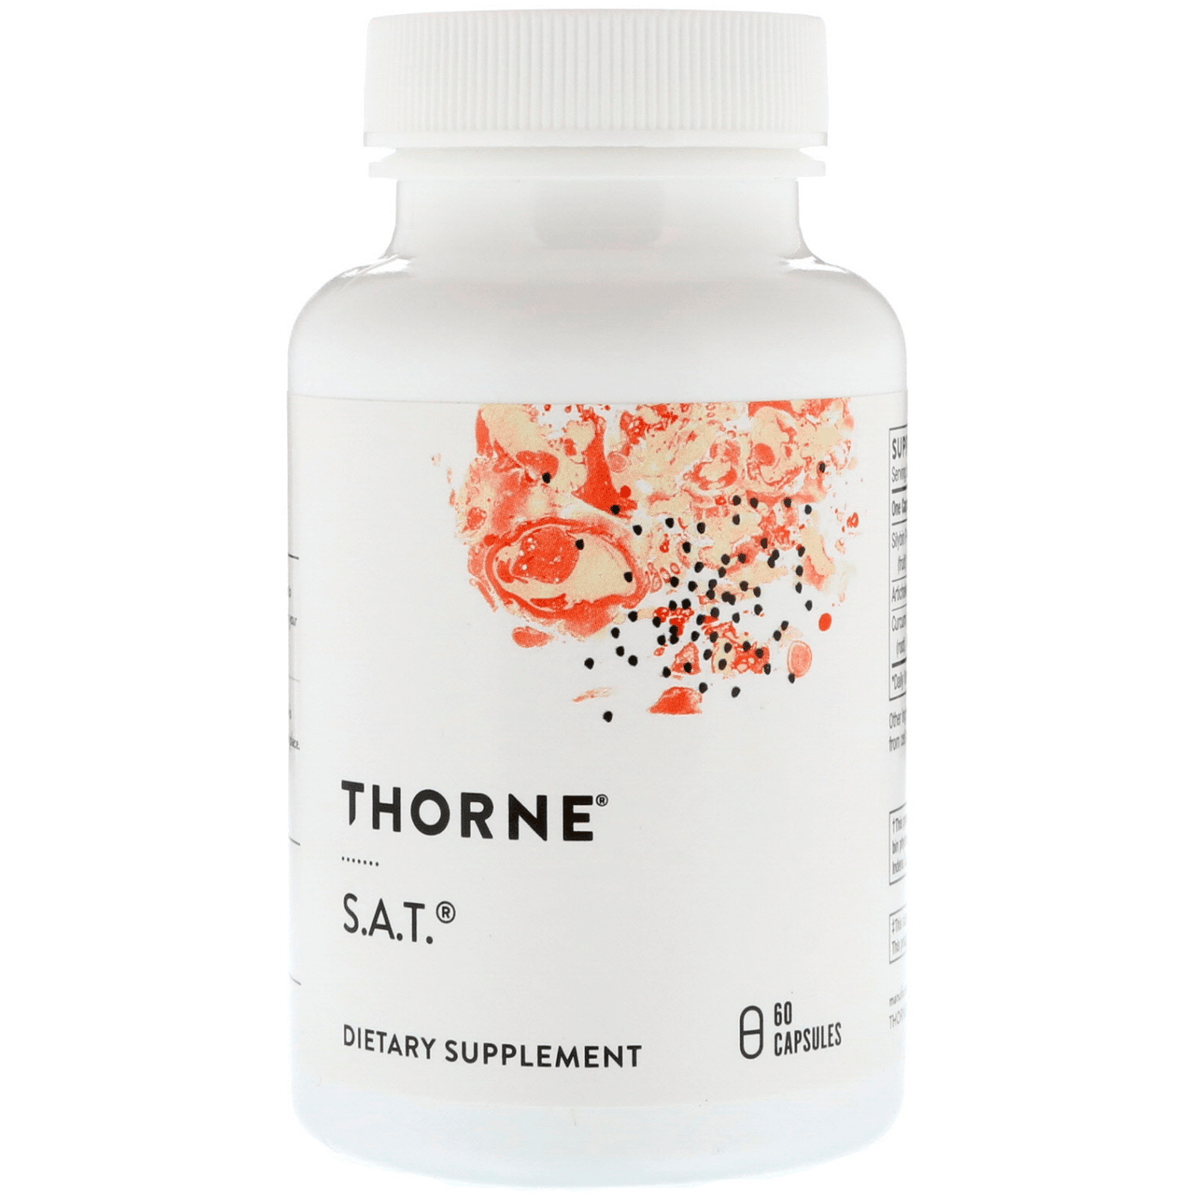 Thorne S.A.T. - Silymarin, Artichoke, and Turmeric Extracts 60 Veggie Caps Supplements - Liver Care at Village Vitamin Store